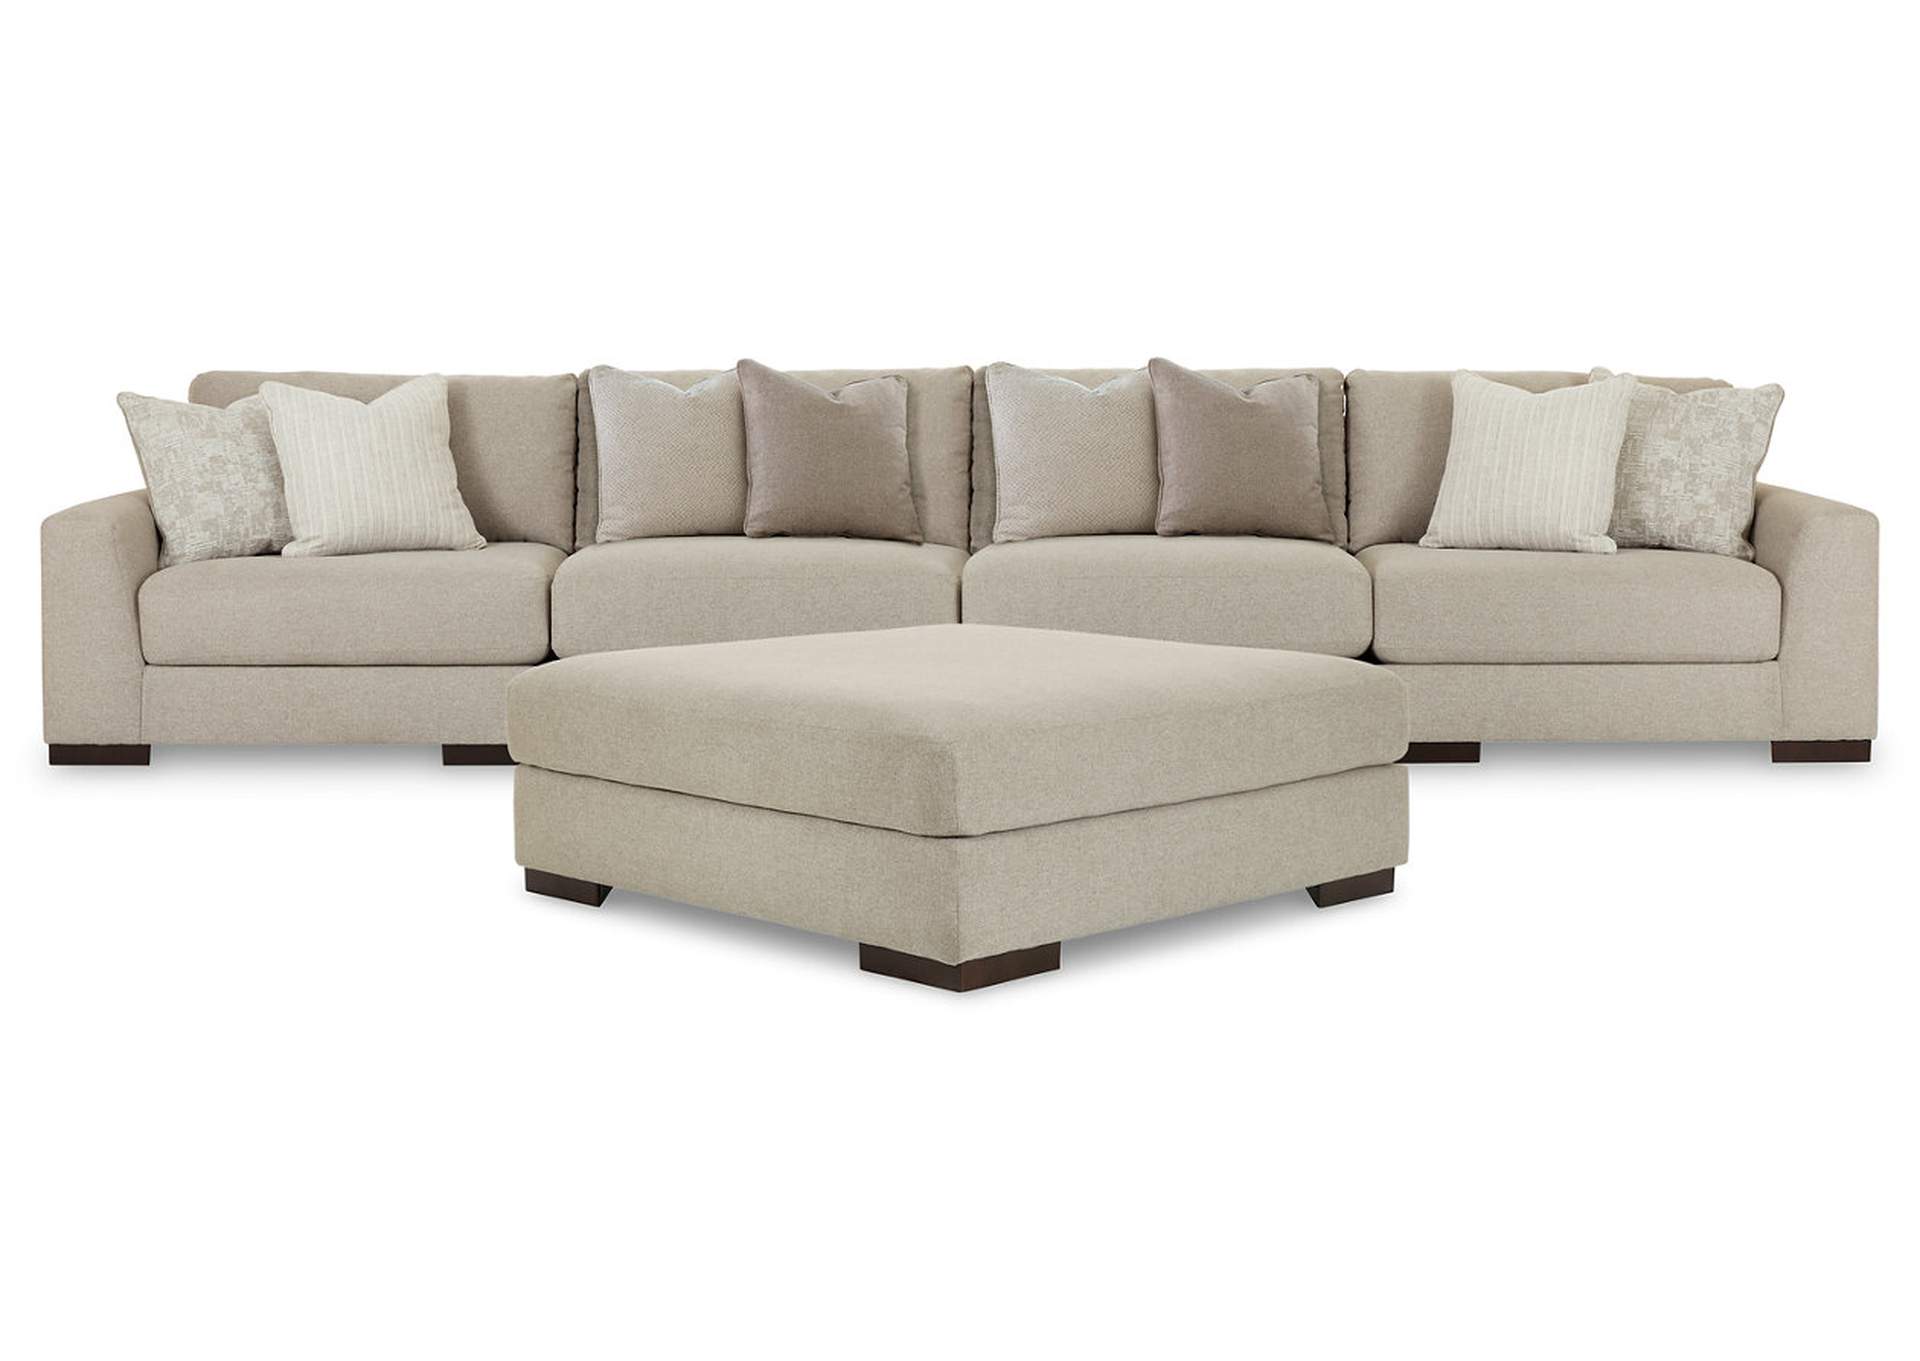 Lyndeboro 4-Piece Sectional with Ottoman,Ashley